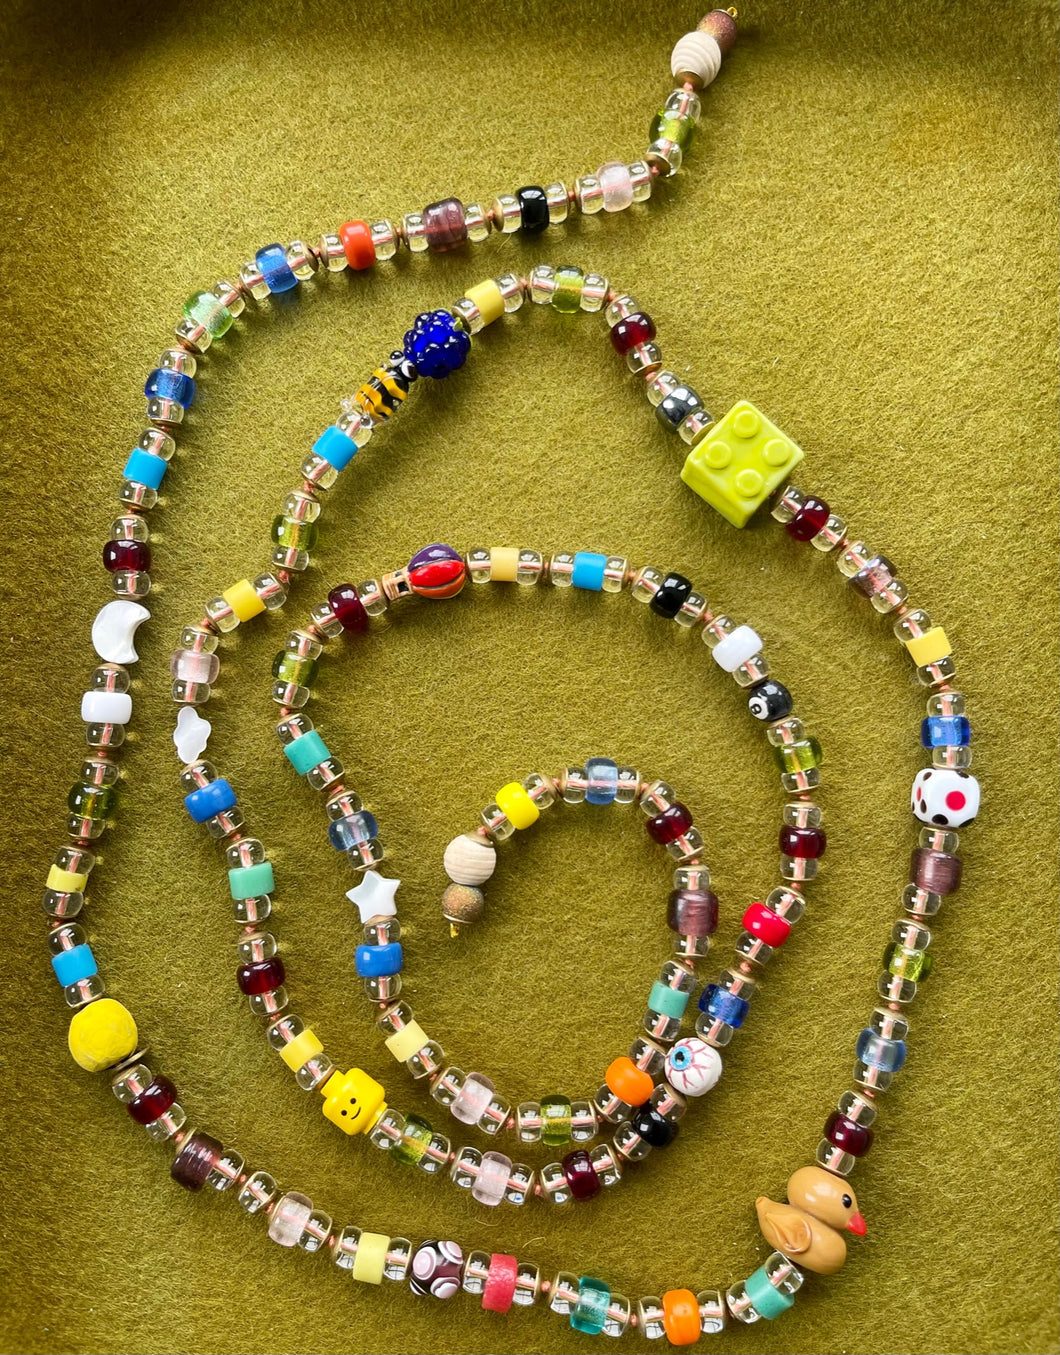 The Hella Playful Wrap necklace